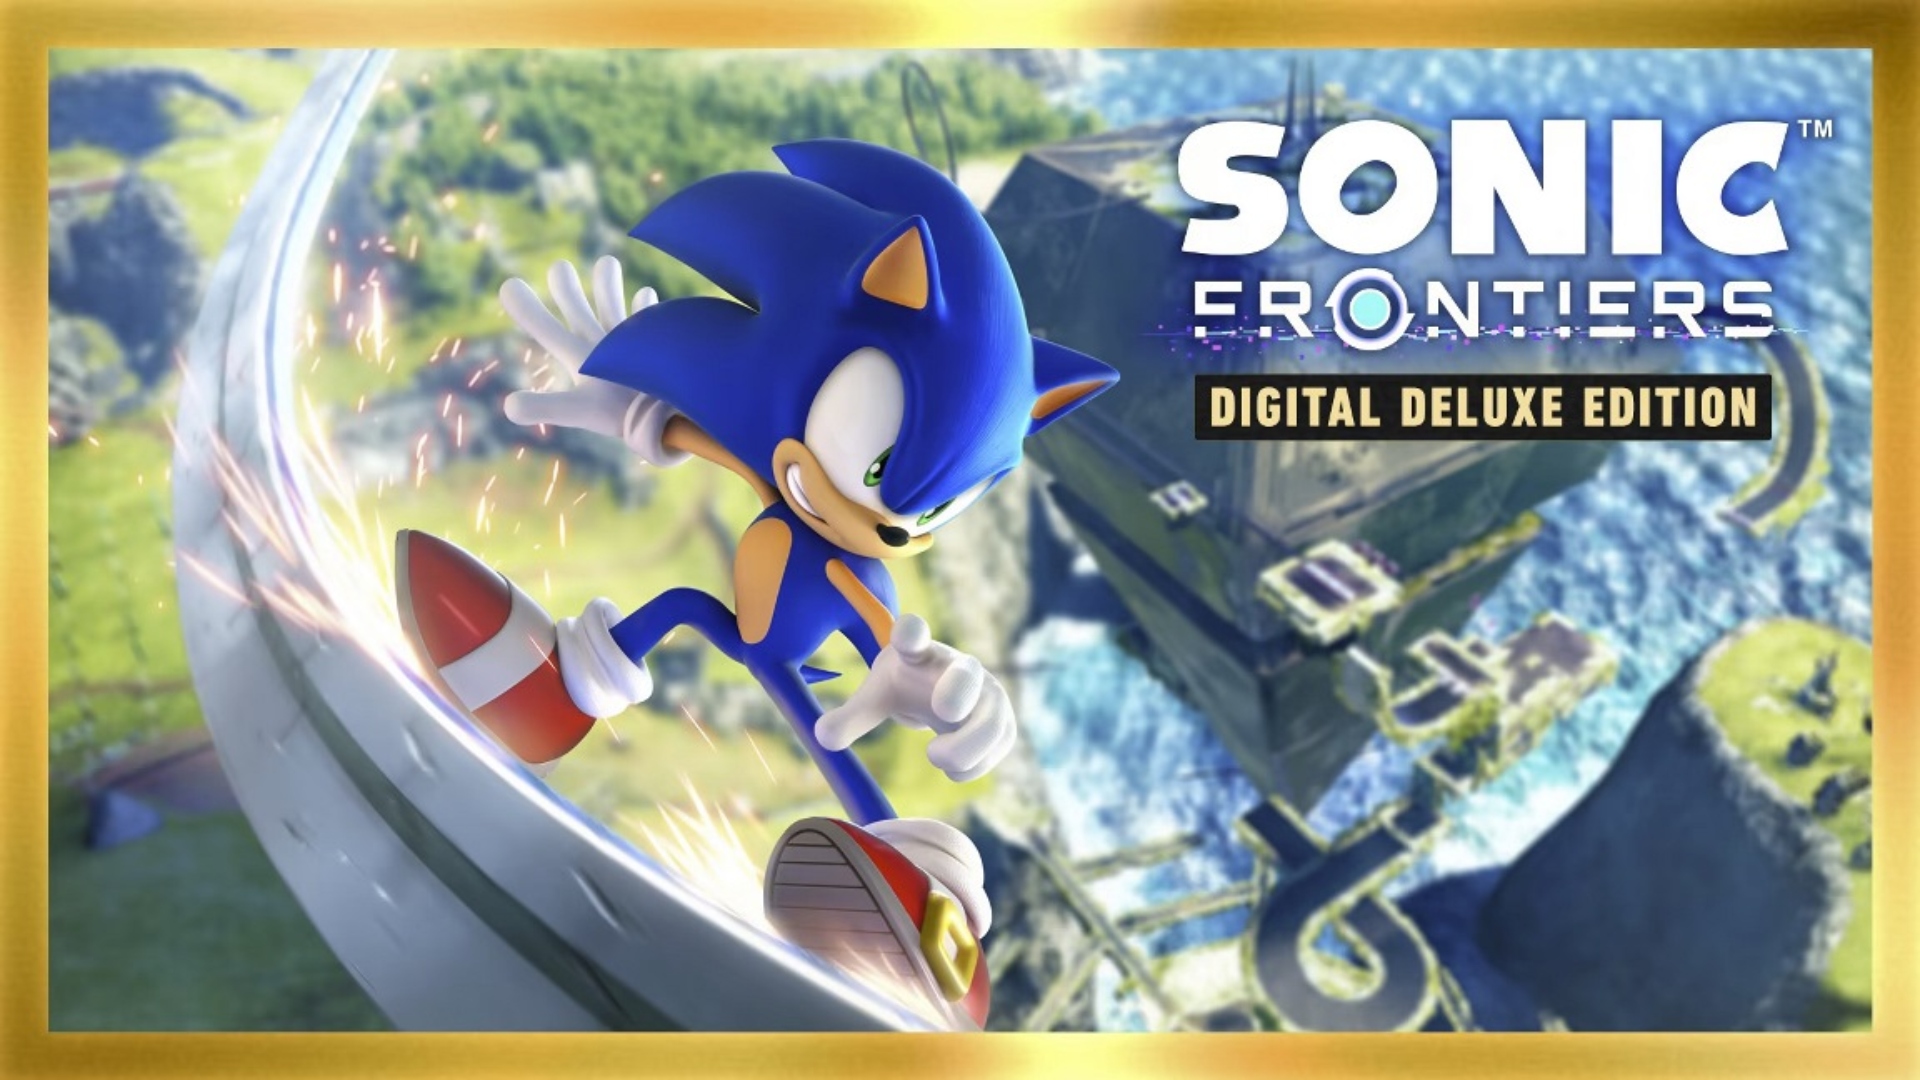 Sonic Frontiers pre-order image showing artwork of Sonic grinding beside the logo of Sonic Frontiers Digital Deluxe Edition.